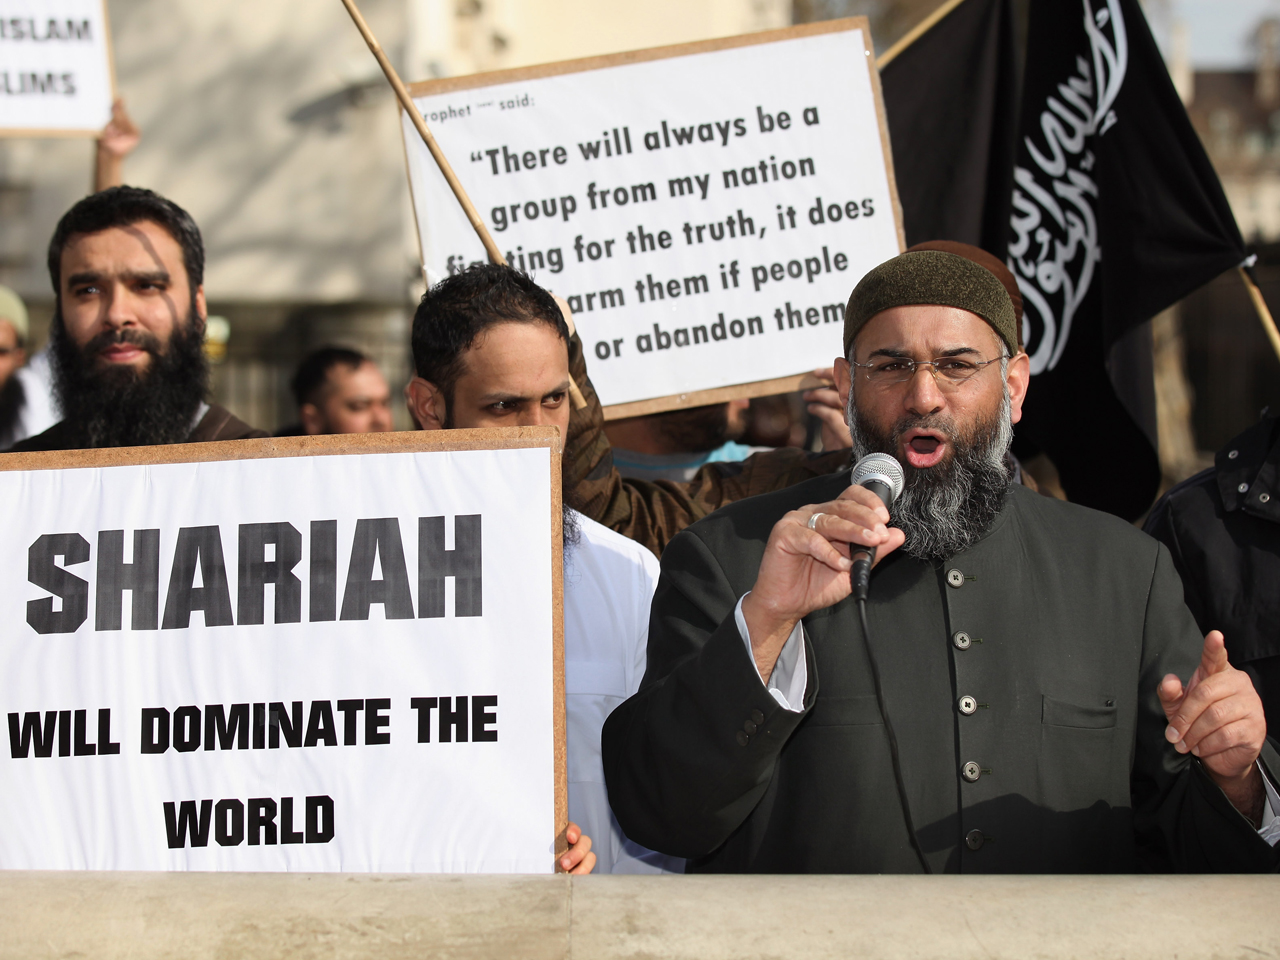 Anjem Choudary Islamic Extremist Preacher Of London Guilty Of Inviting Support For Isis In 